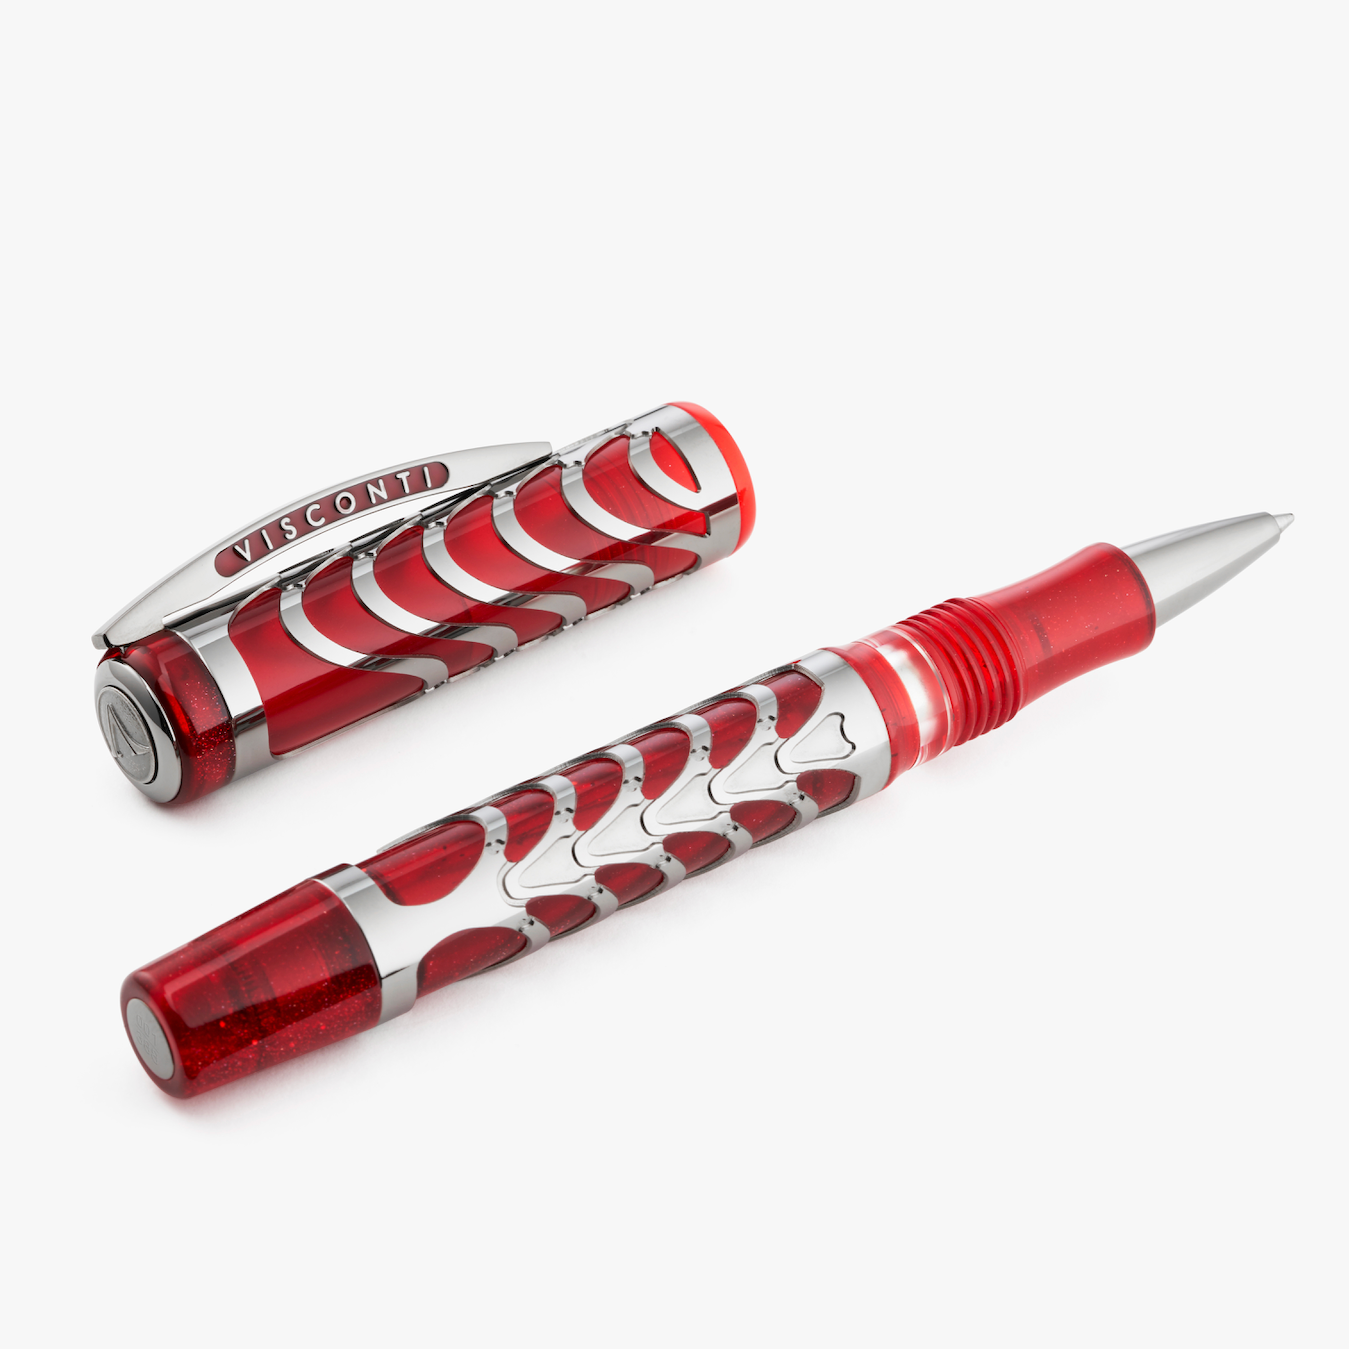 Visconti Skeleton Limited Edition Ruby Red Rollerball Pen